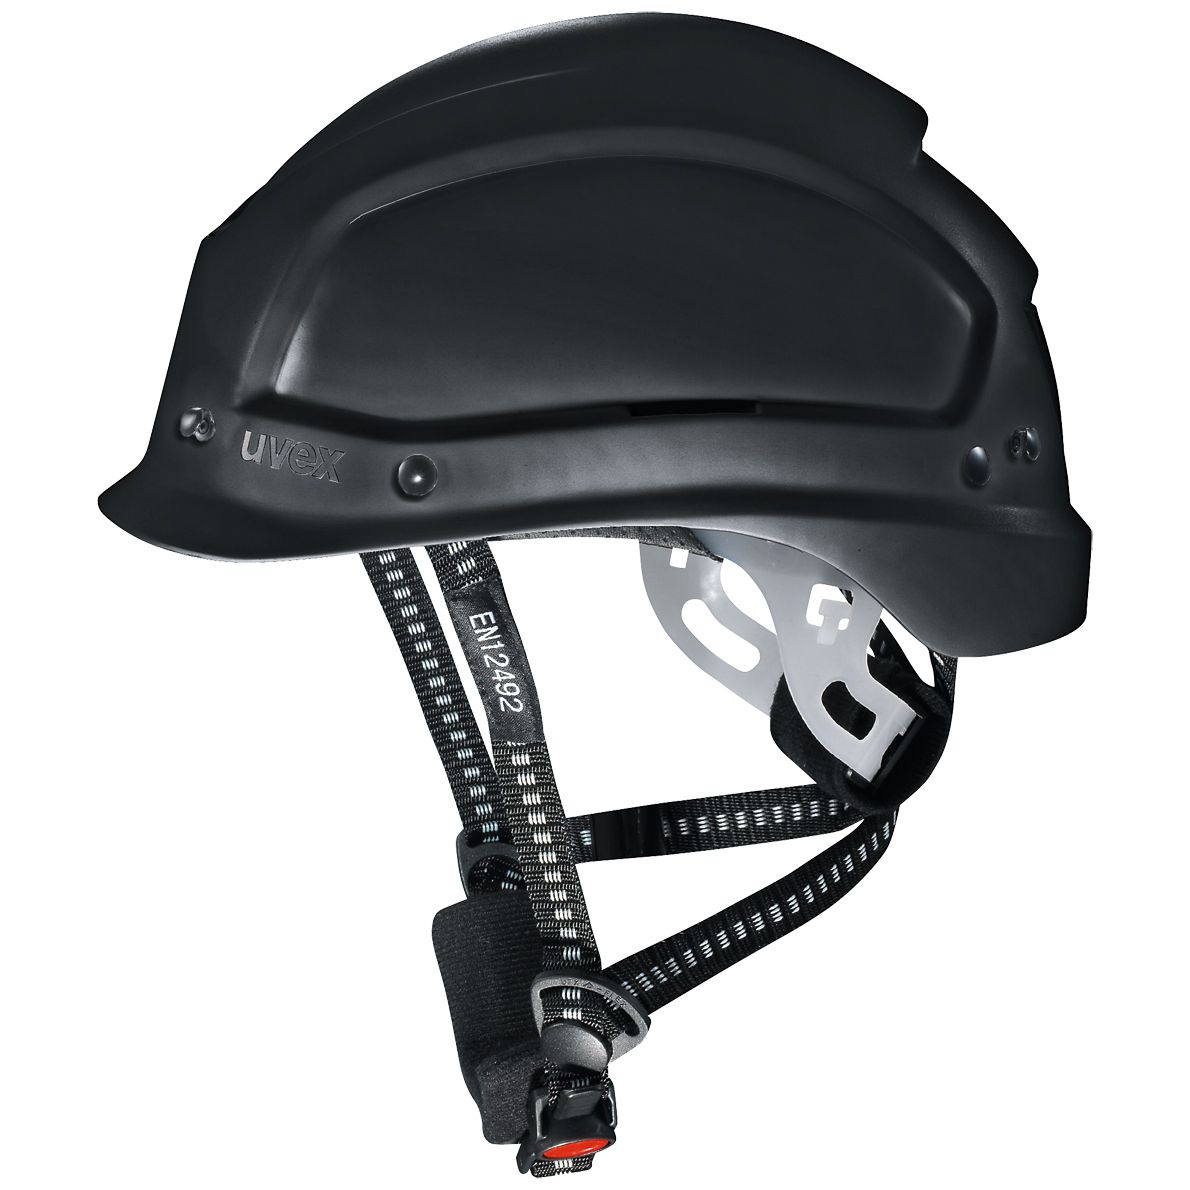 uvex pheos alpine mountaineering & construction helmet - safety helmet for working at heights - EN 397/12492 - with rotating wheel - black